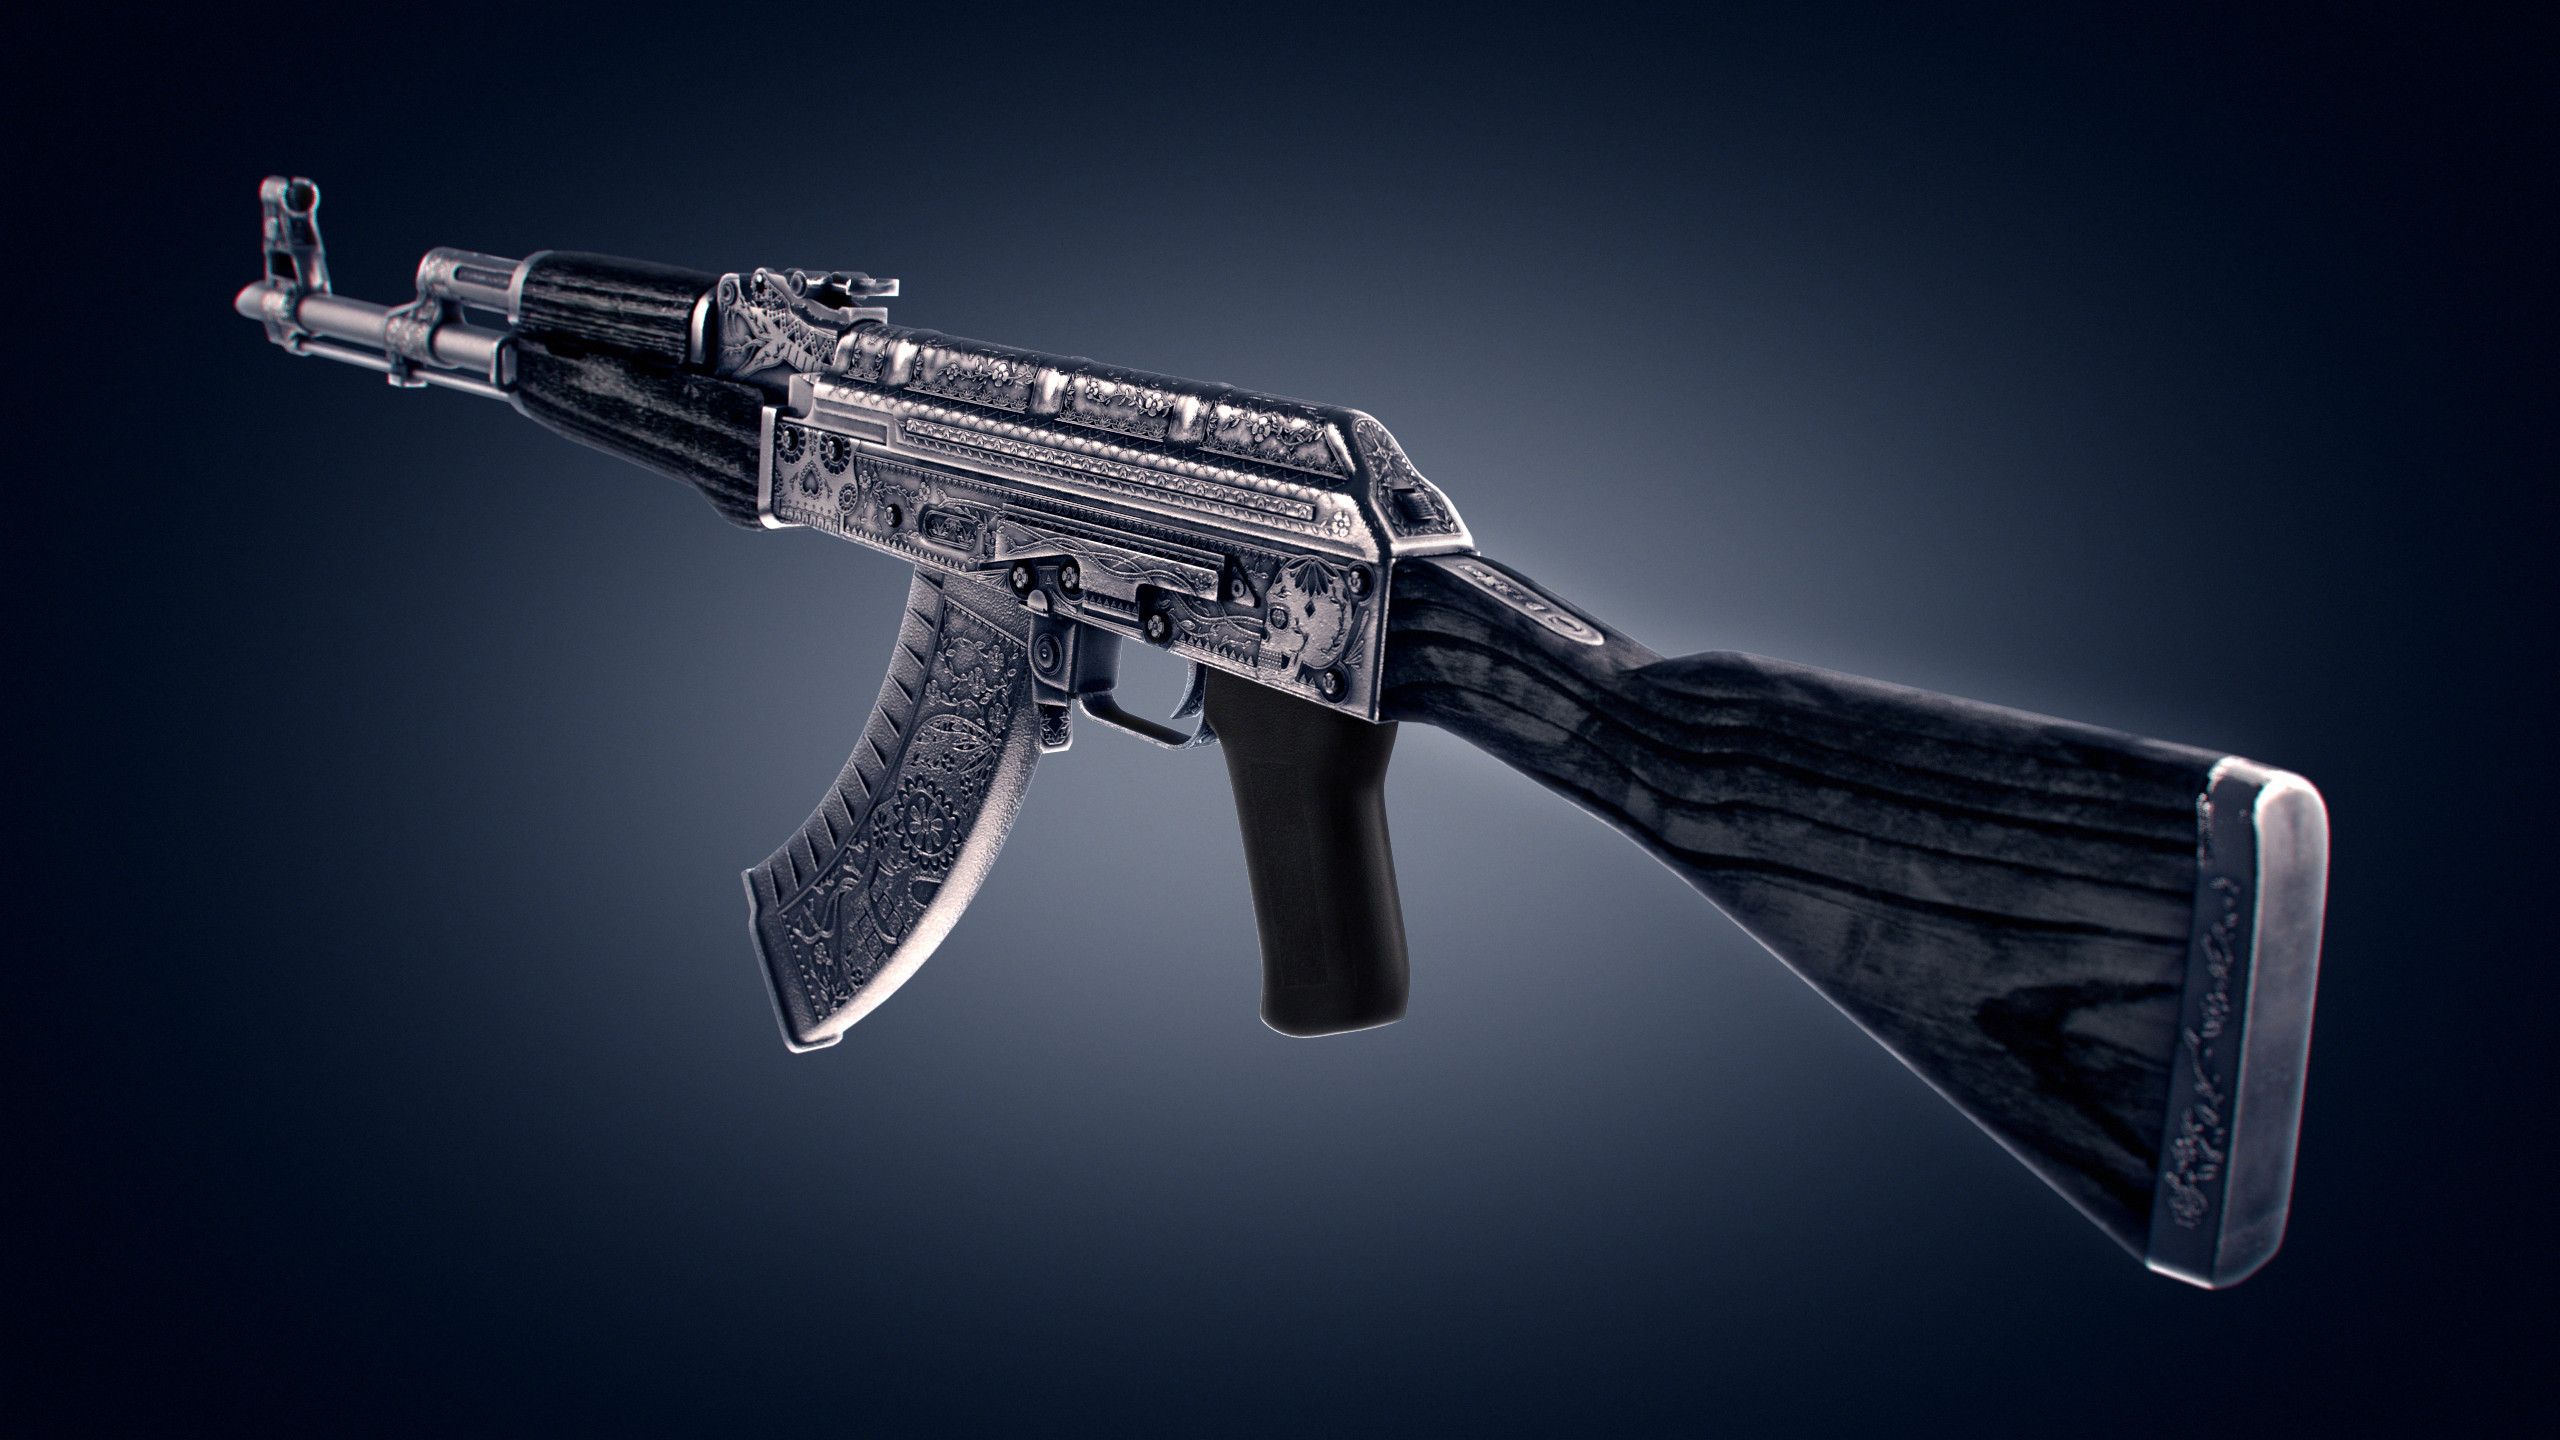 Free download My first CSGO weapon skin 3D render AK 47 Cartel inspired by [2560x1440] for your Desktop, Mobile & Tablet. Explore Wasteland Rebel CS GO Wallpaper